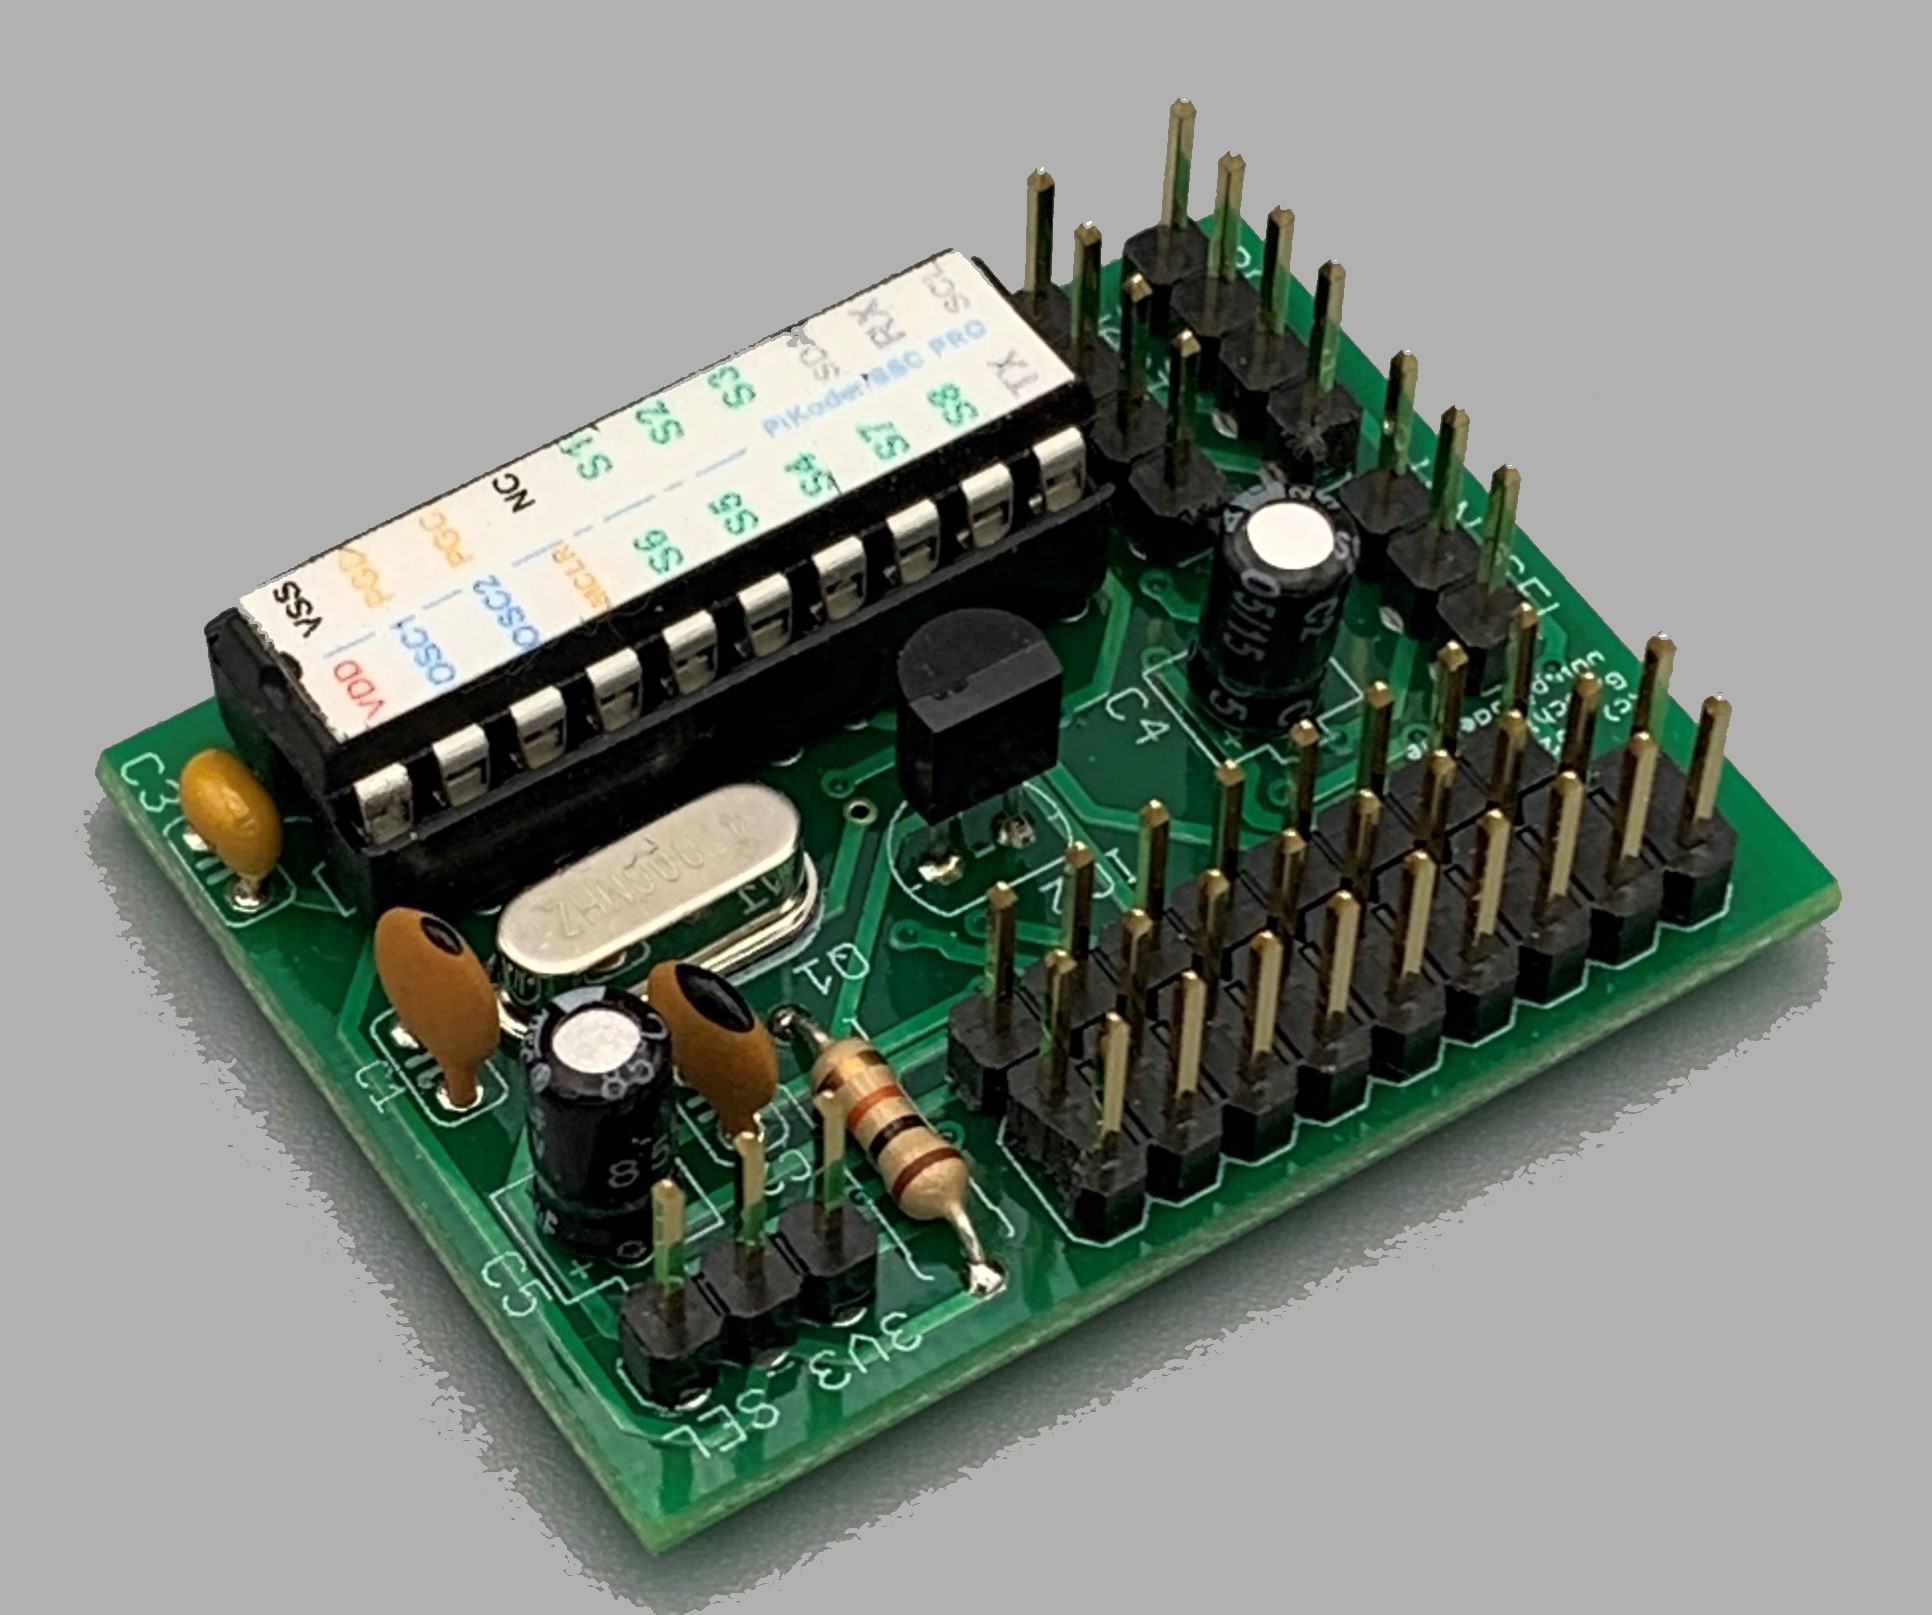 PiKoder/SSC PRO evaluation board kit